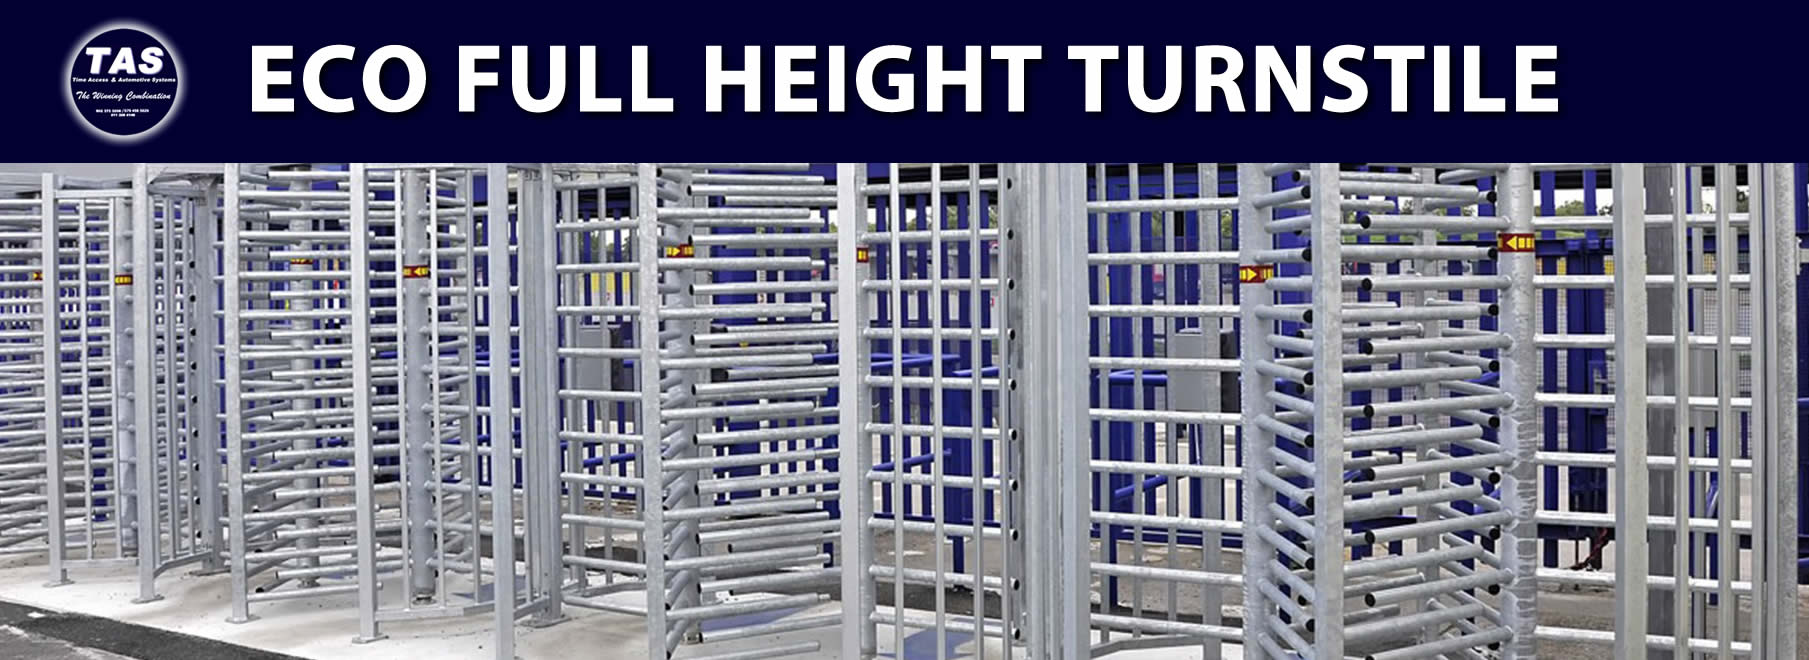 Turnstile Eco full height turnstile Access Control and Attendance stand alone product